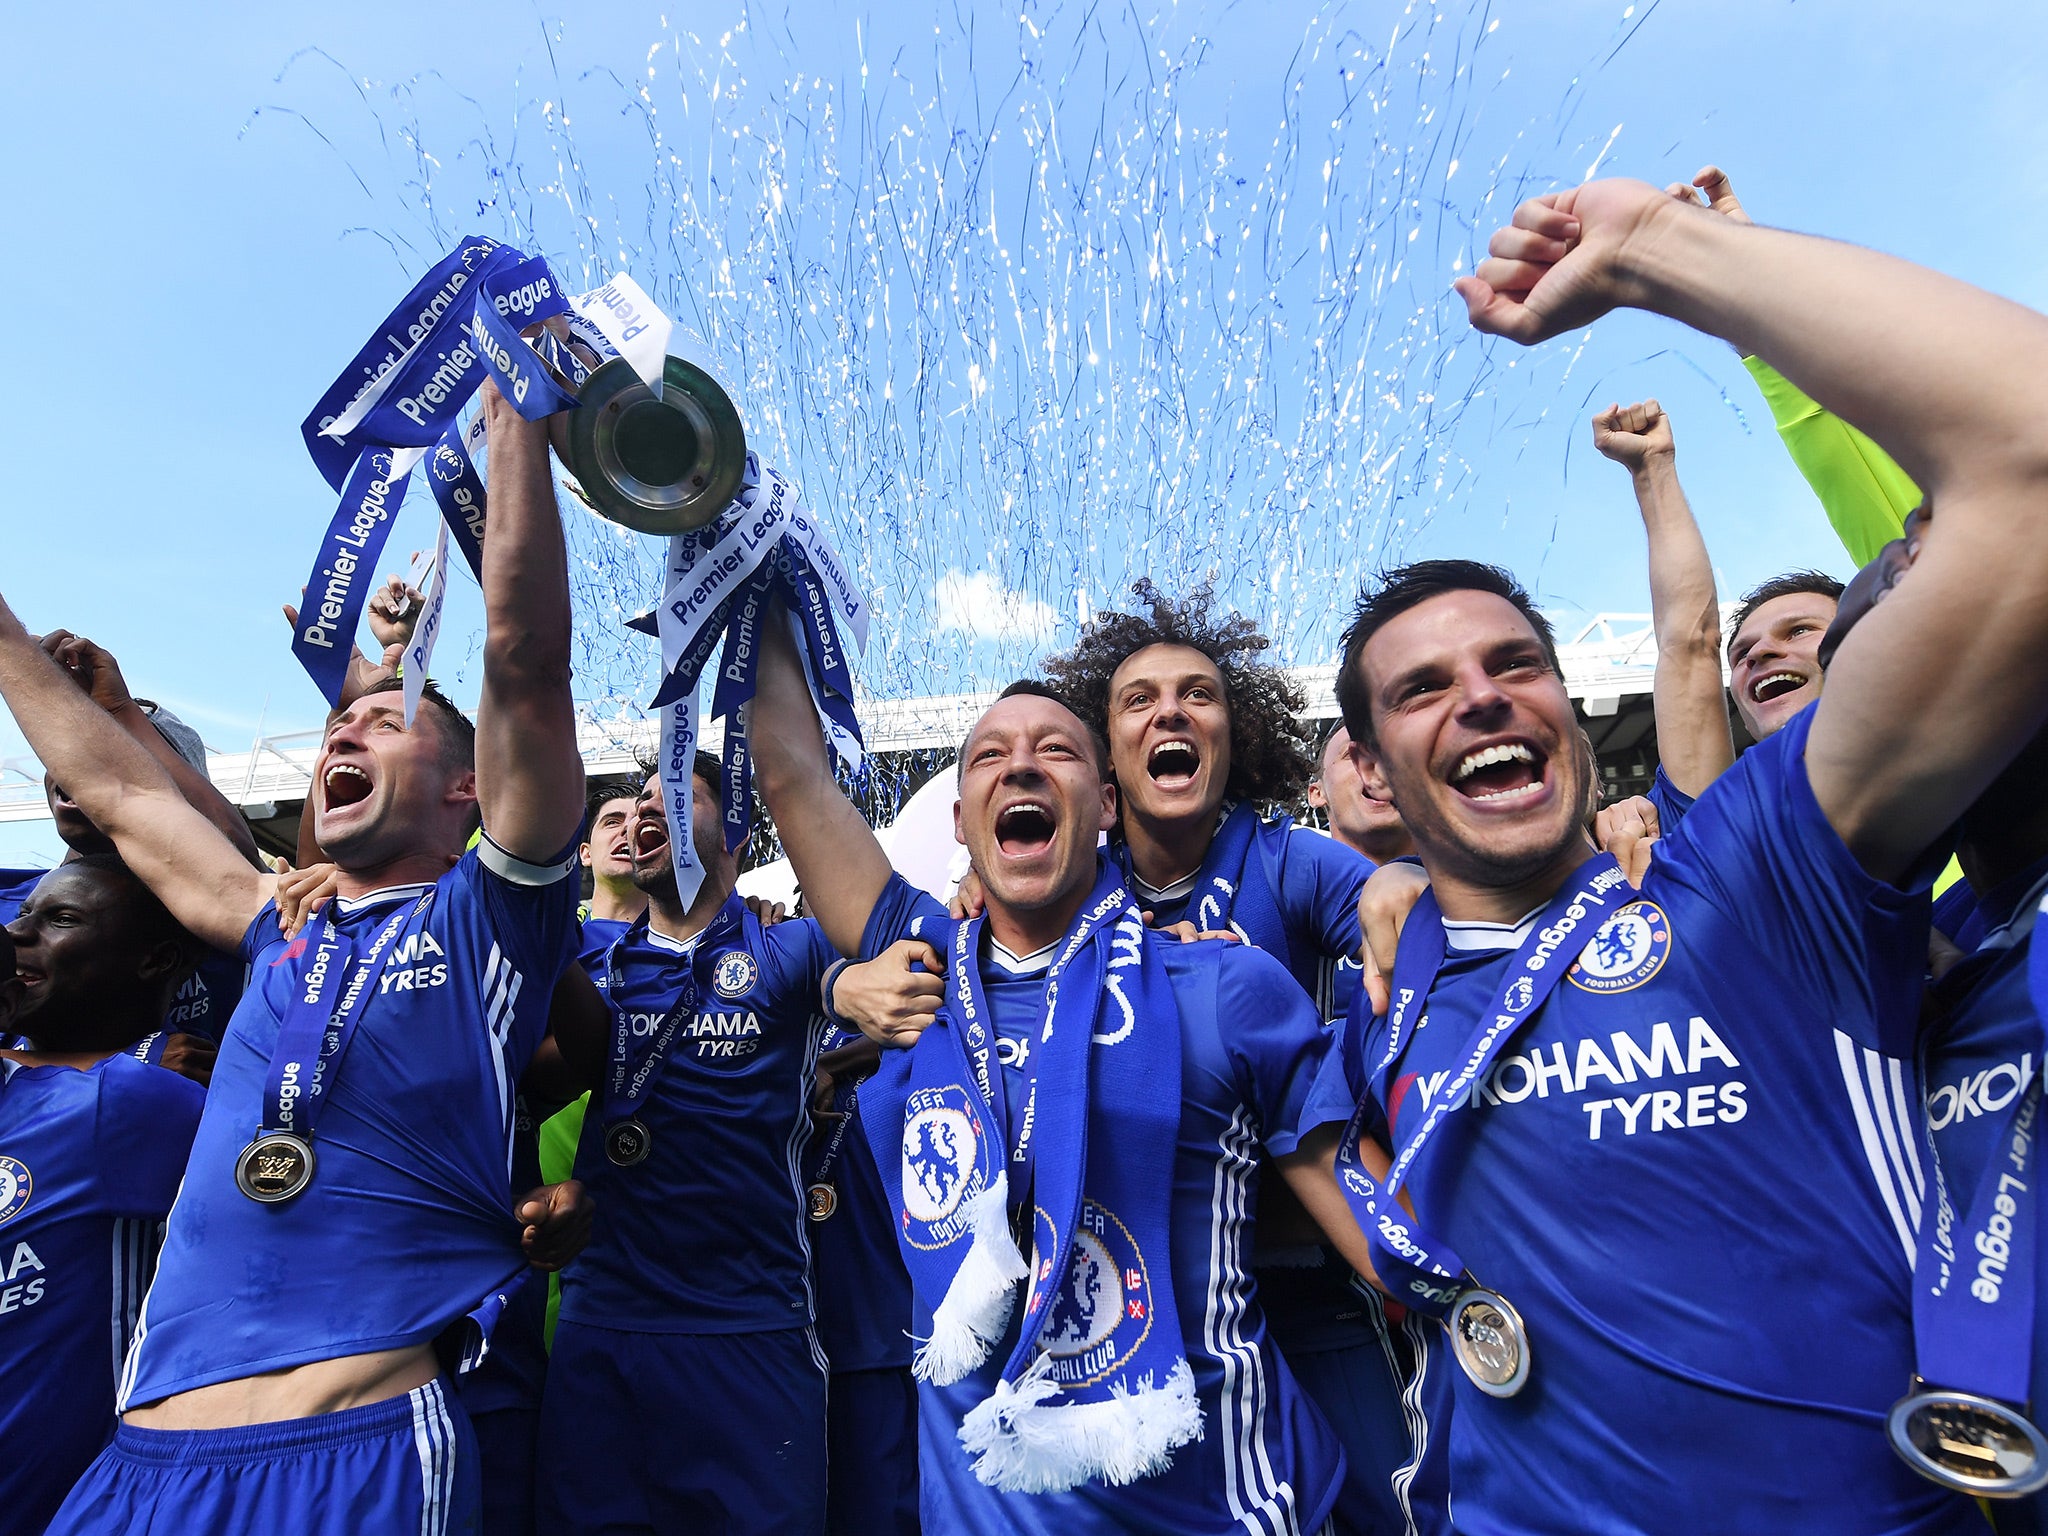 Chelsea's players lifted the Premier League trophy after beating Sunderland on Sunday